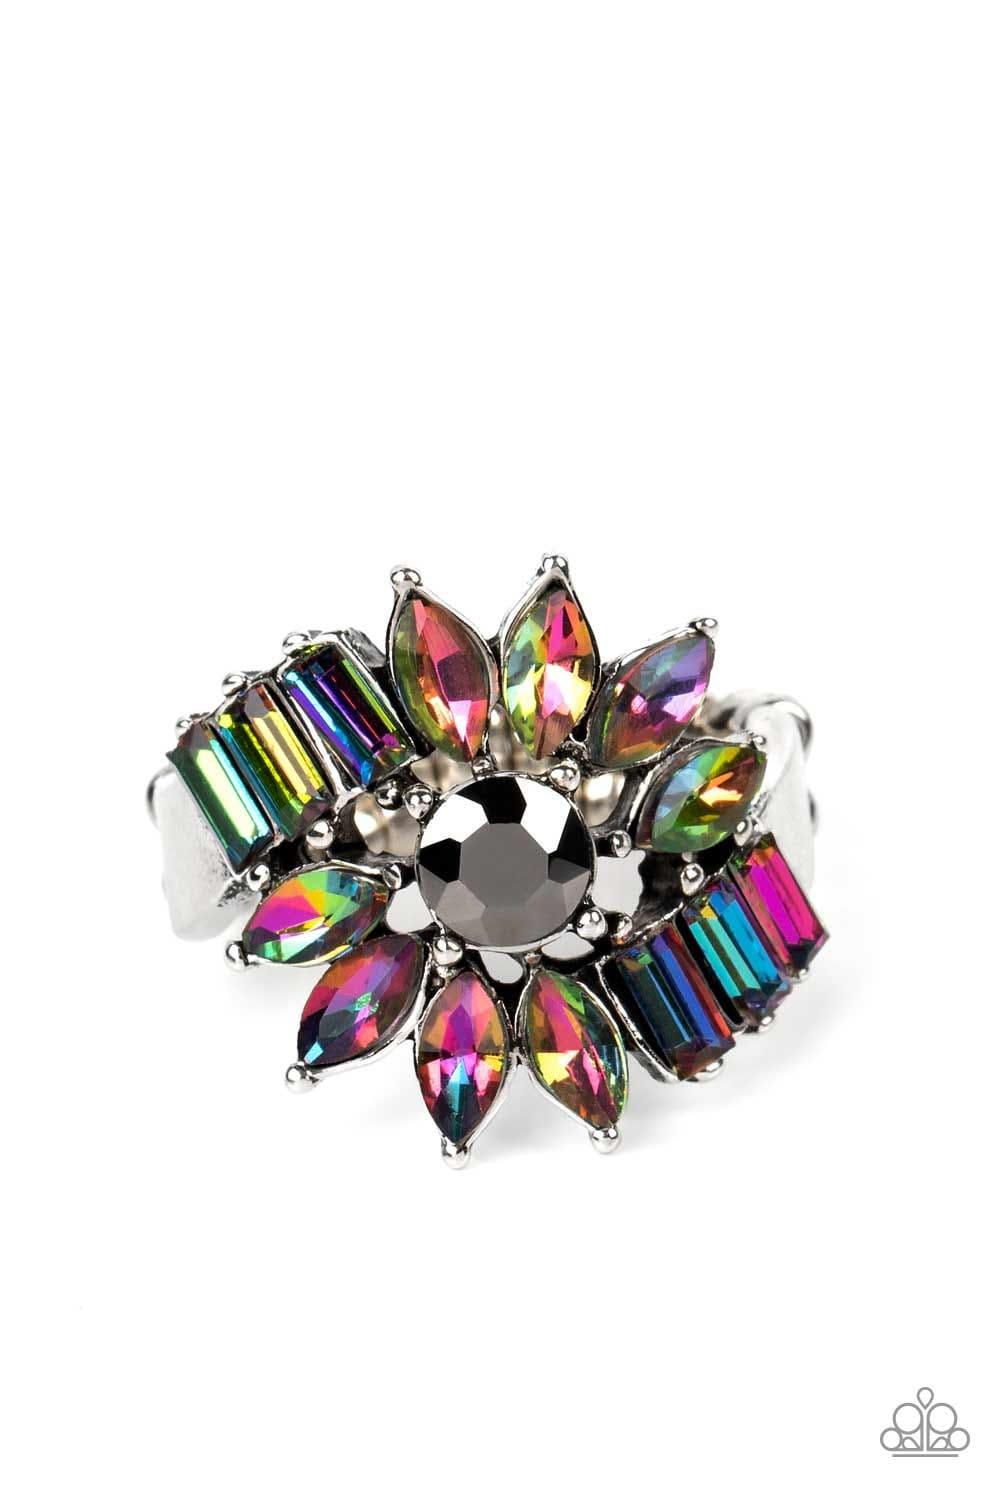 Paparazzi Accessories - Untamable Universe - Multicolor "oil-spill" Ring - Bling by JessieK